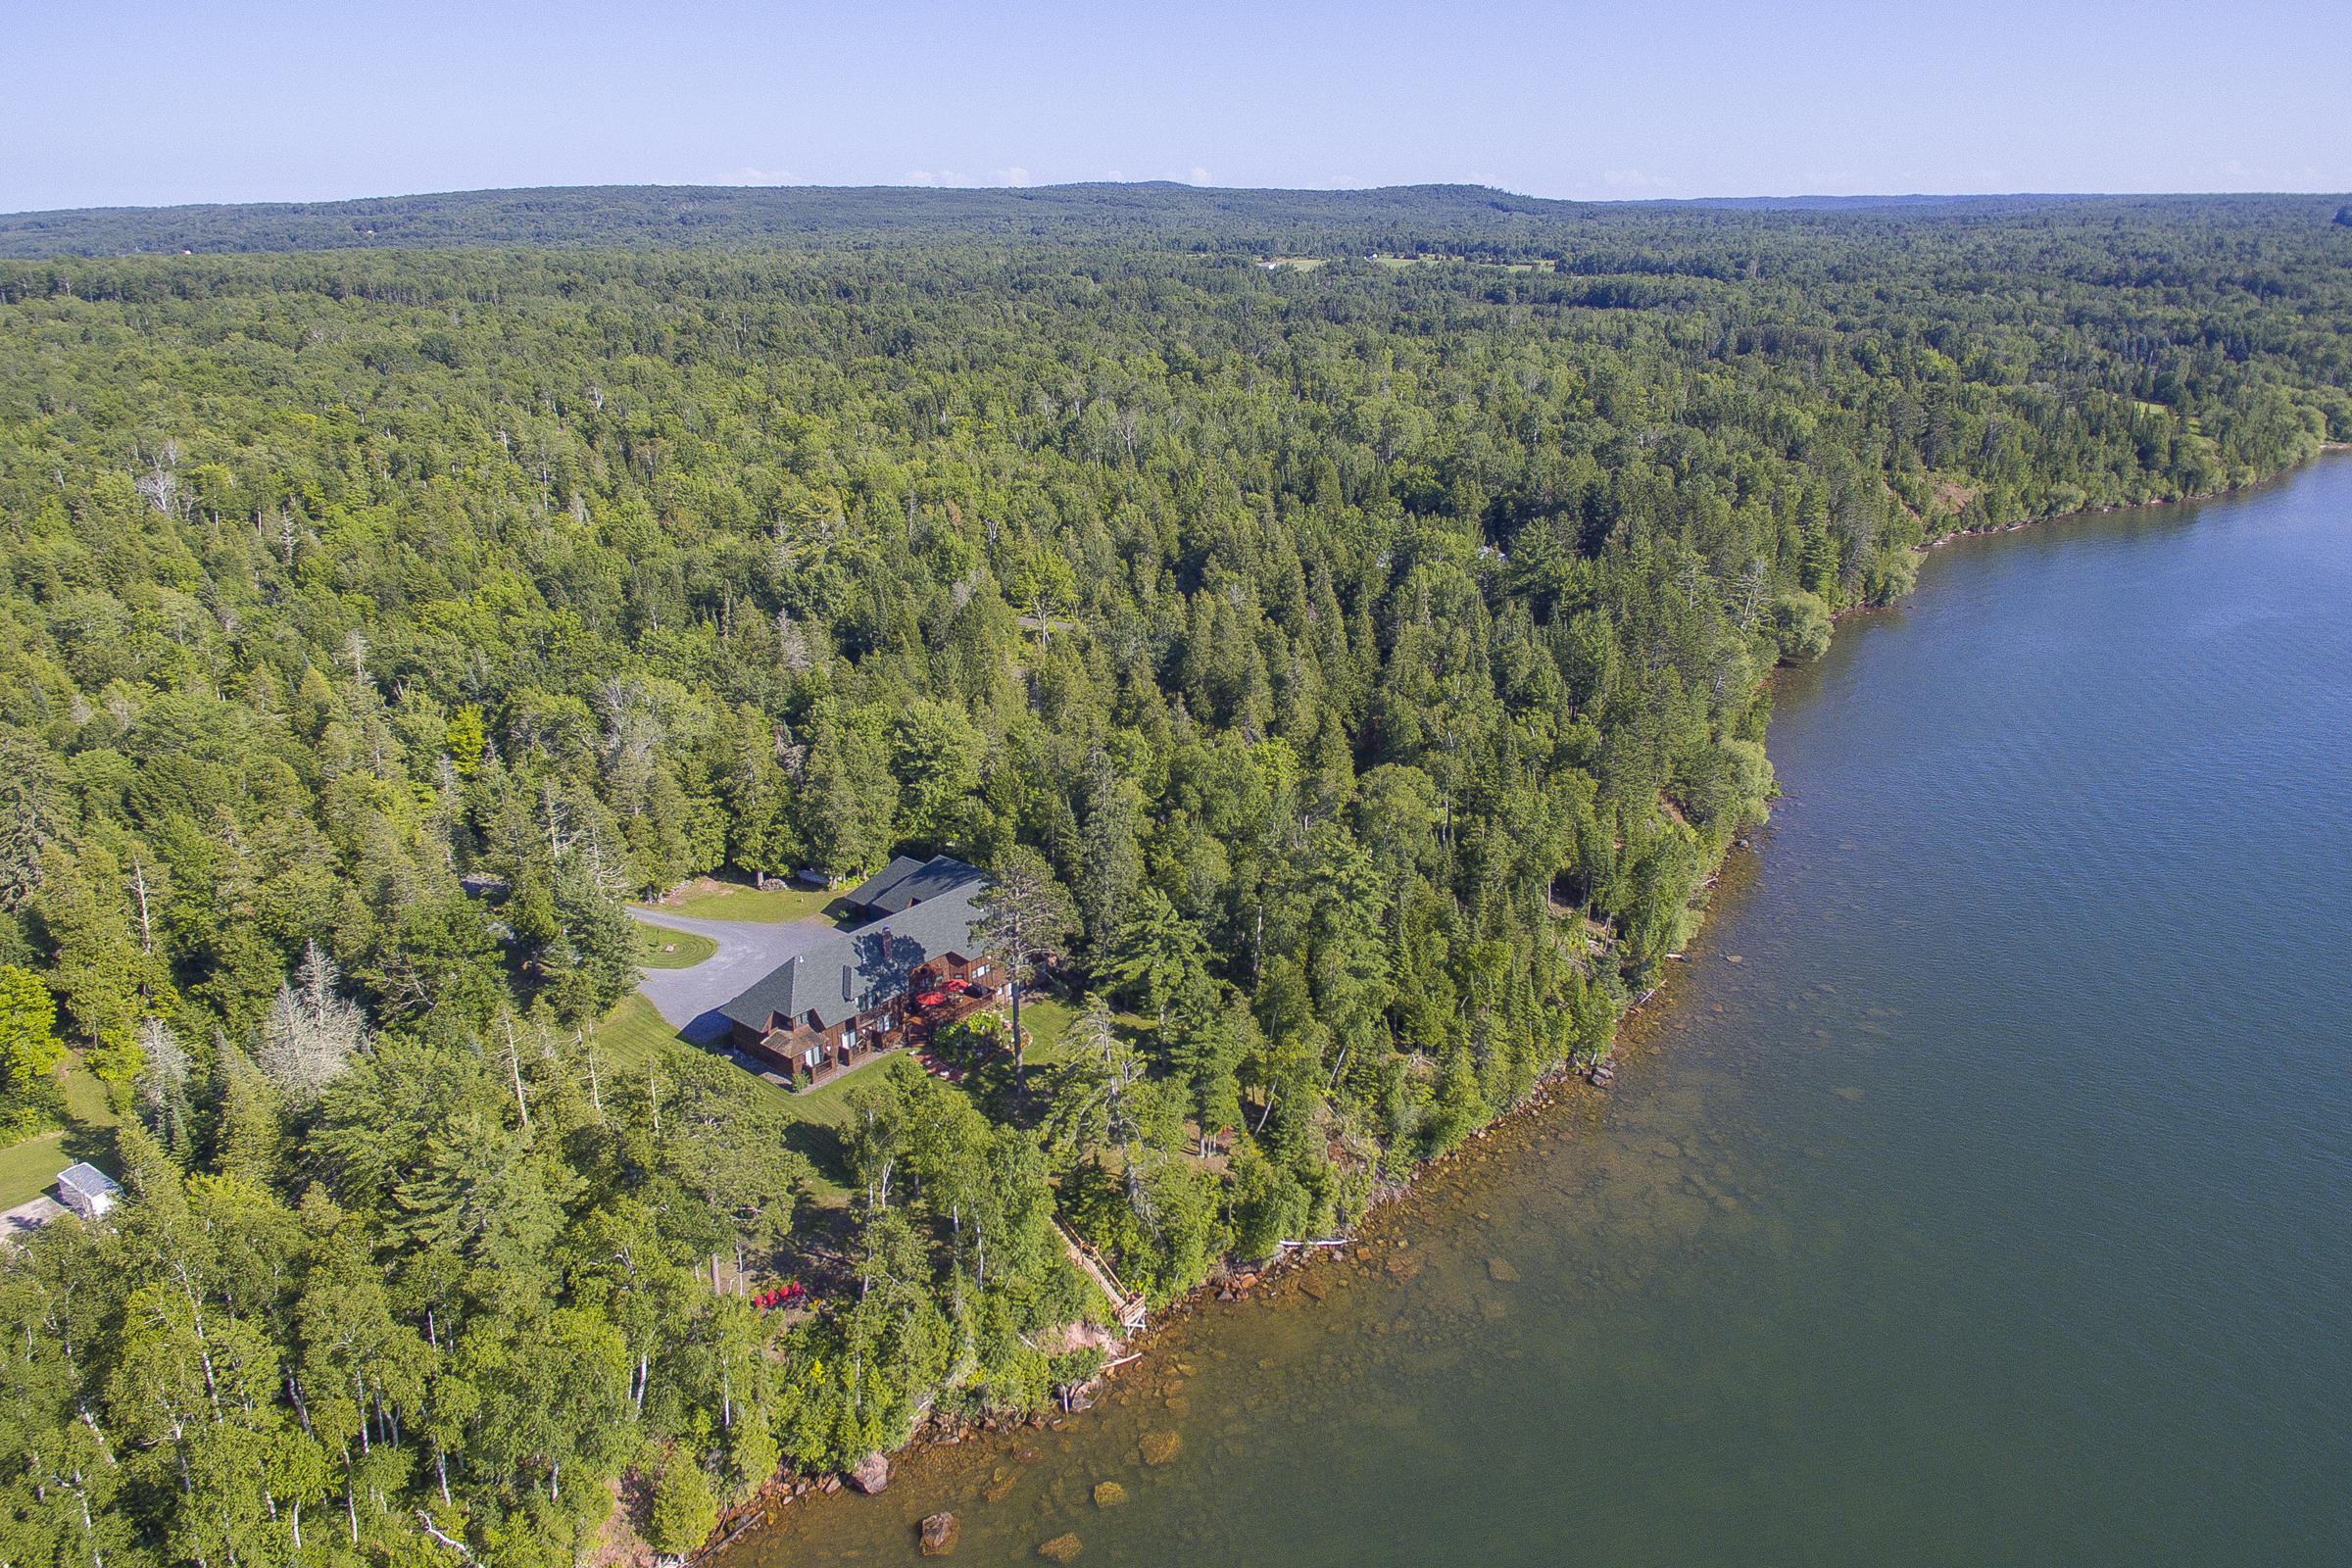  bed and breakfast inn for sale - Siskiwit Bay Lodge